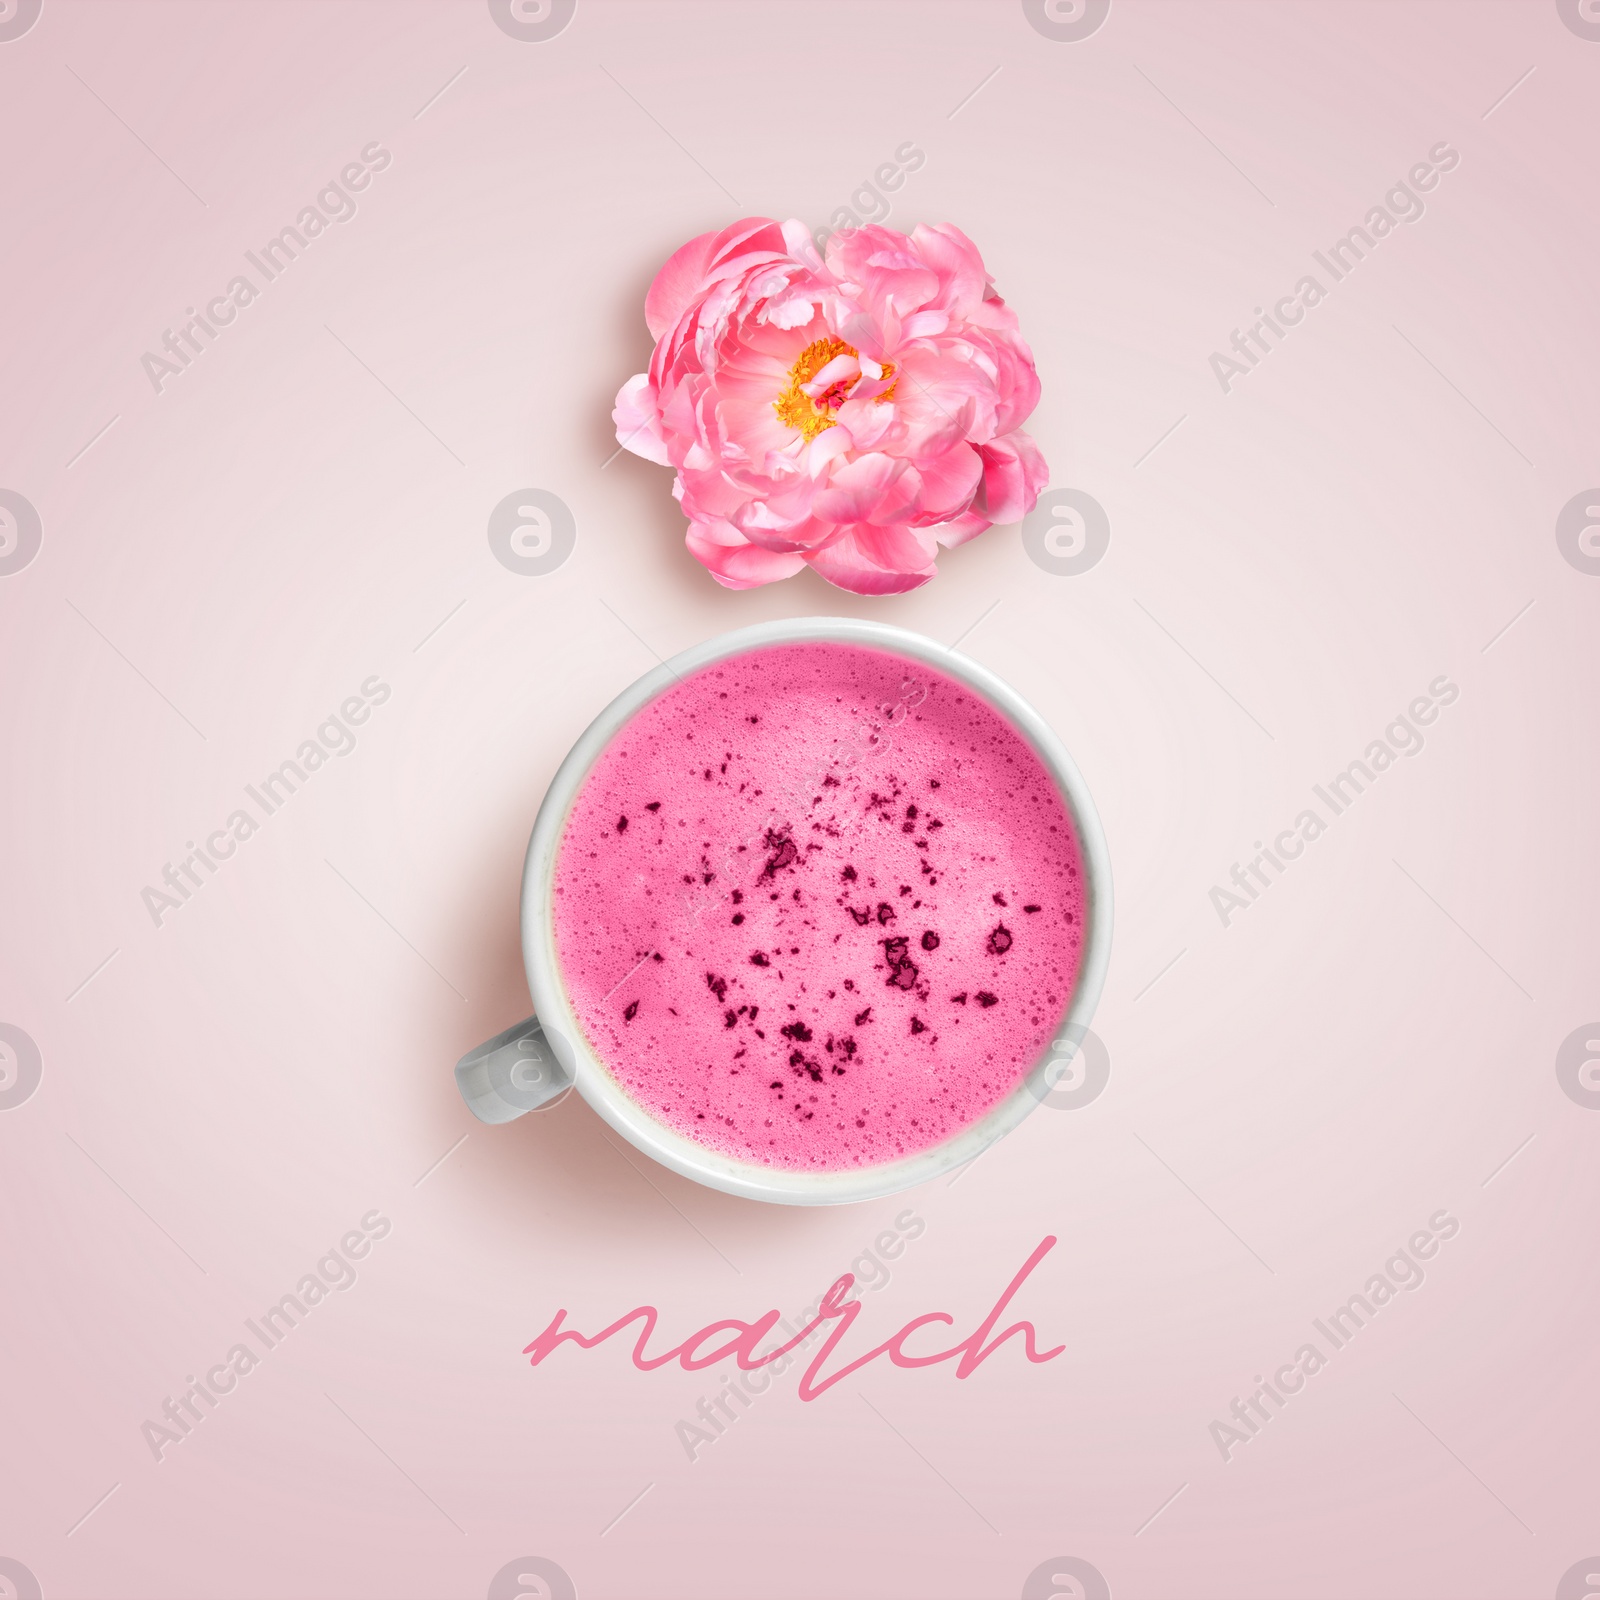 Image of 8 March - Happy International Women's Day. Card design with shape of number eight made of peony and cappuccino on pink background, top view